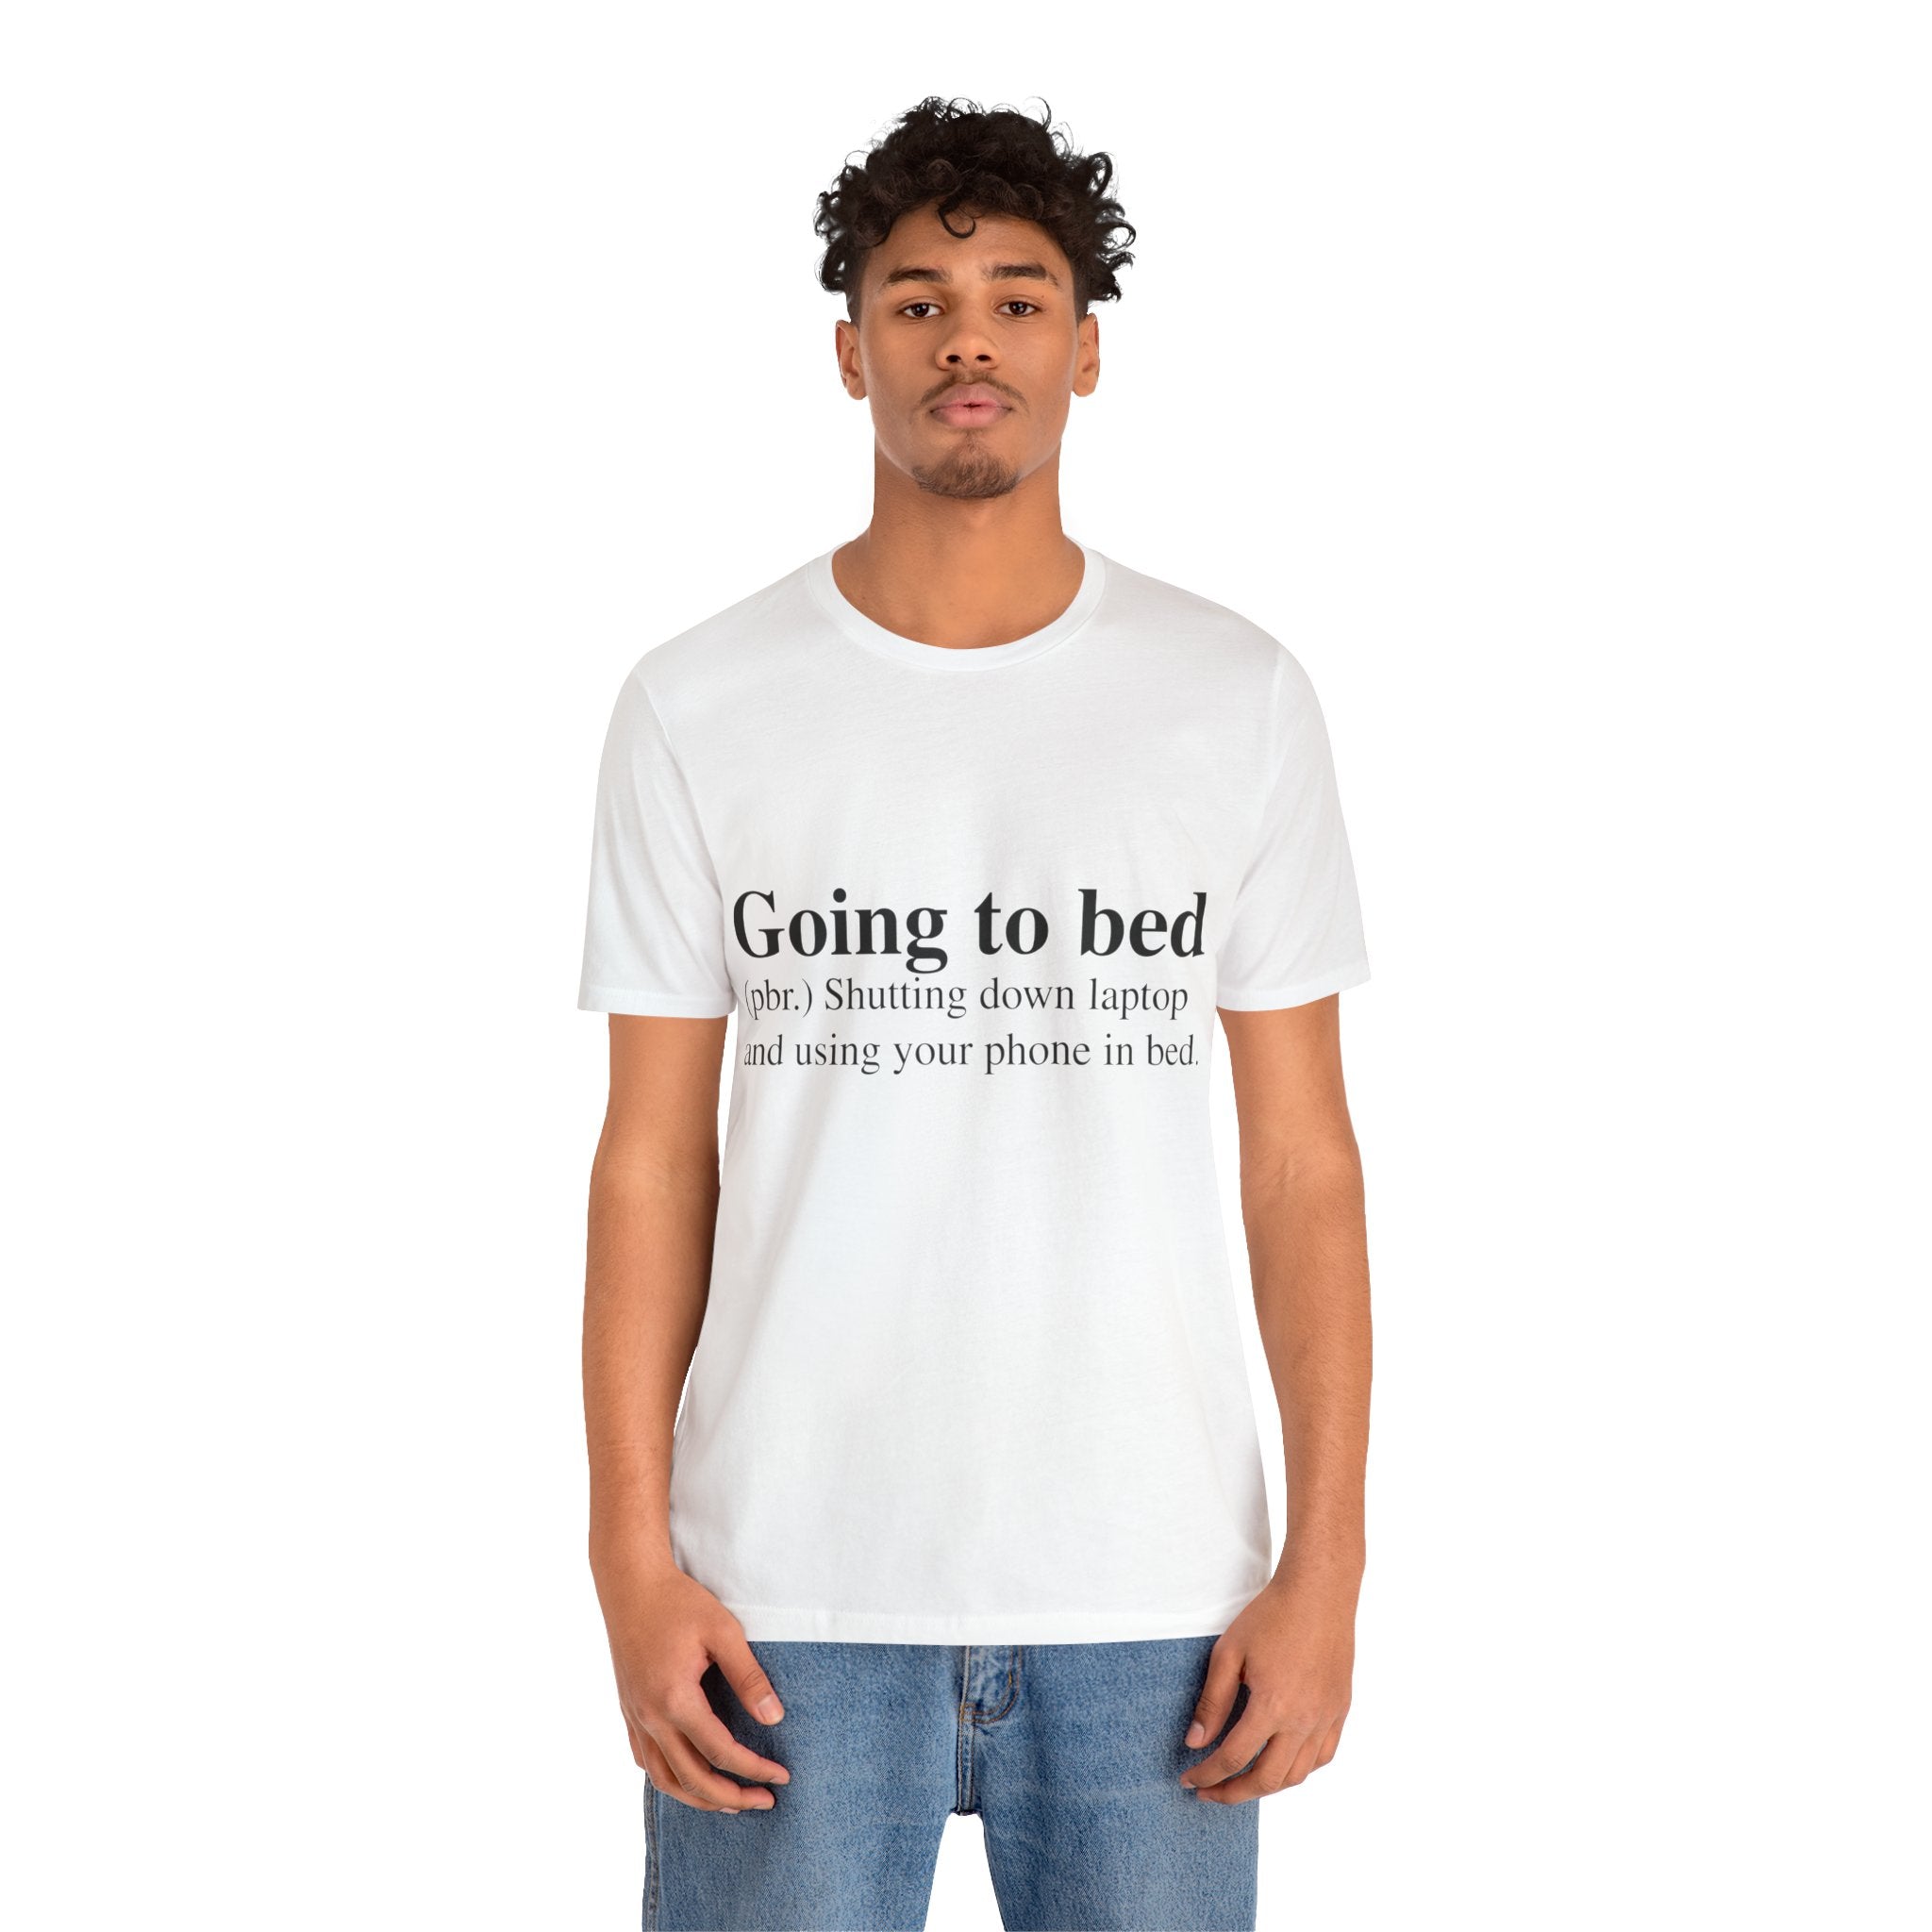 A young man wearing the Going to Bed T-Shirt, a soft cotton, white short sleeve unisex jersey tee with the text "going to bed (br.) shutting down laptop and using your phone in bed" printed on it.